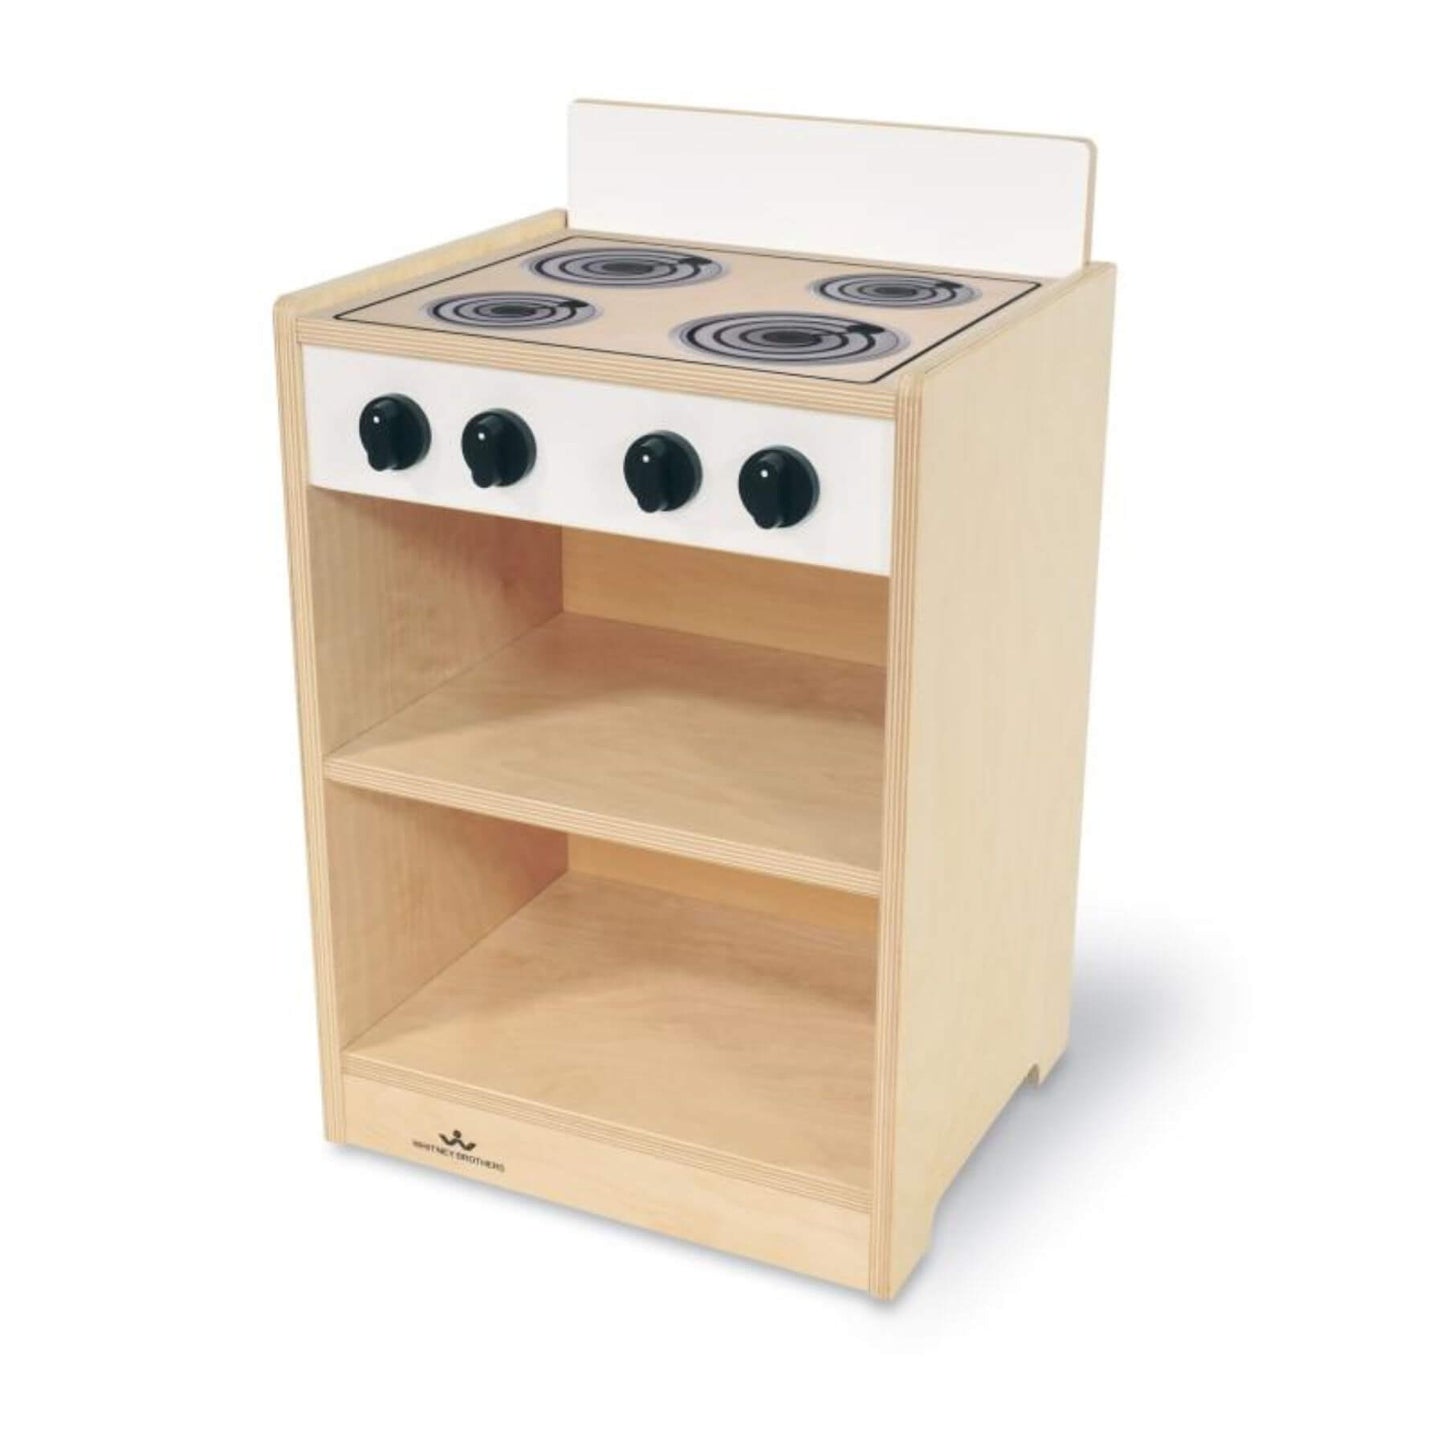 Whitney Brothers Let's Play Toddler Stove White